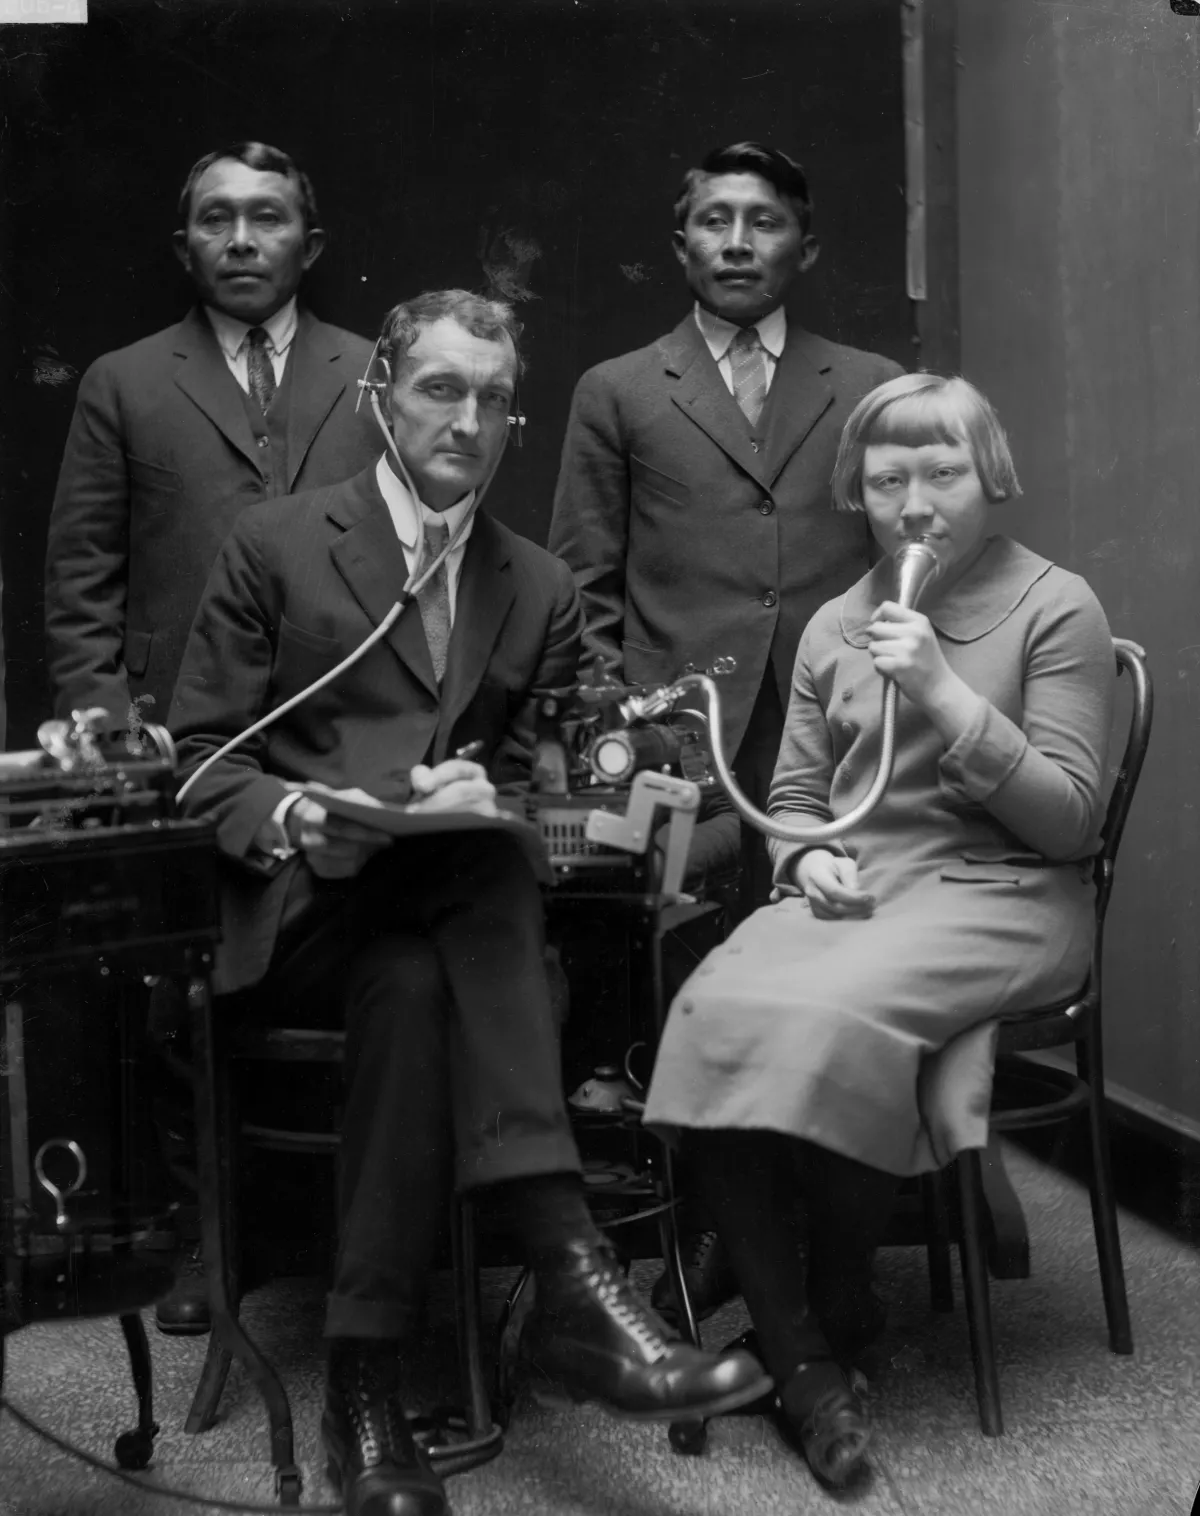 1924 photo of John Peabody Harrington posing with three Tule, or Kuna, people while making dictaphone recordings of Kuna language and songs.